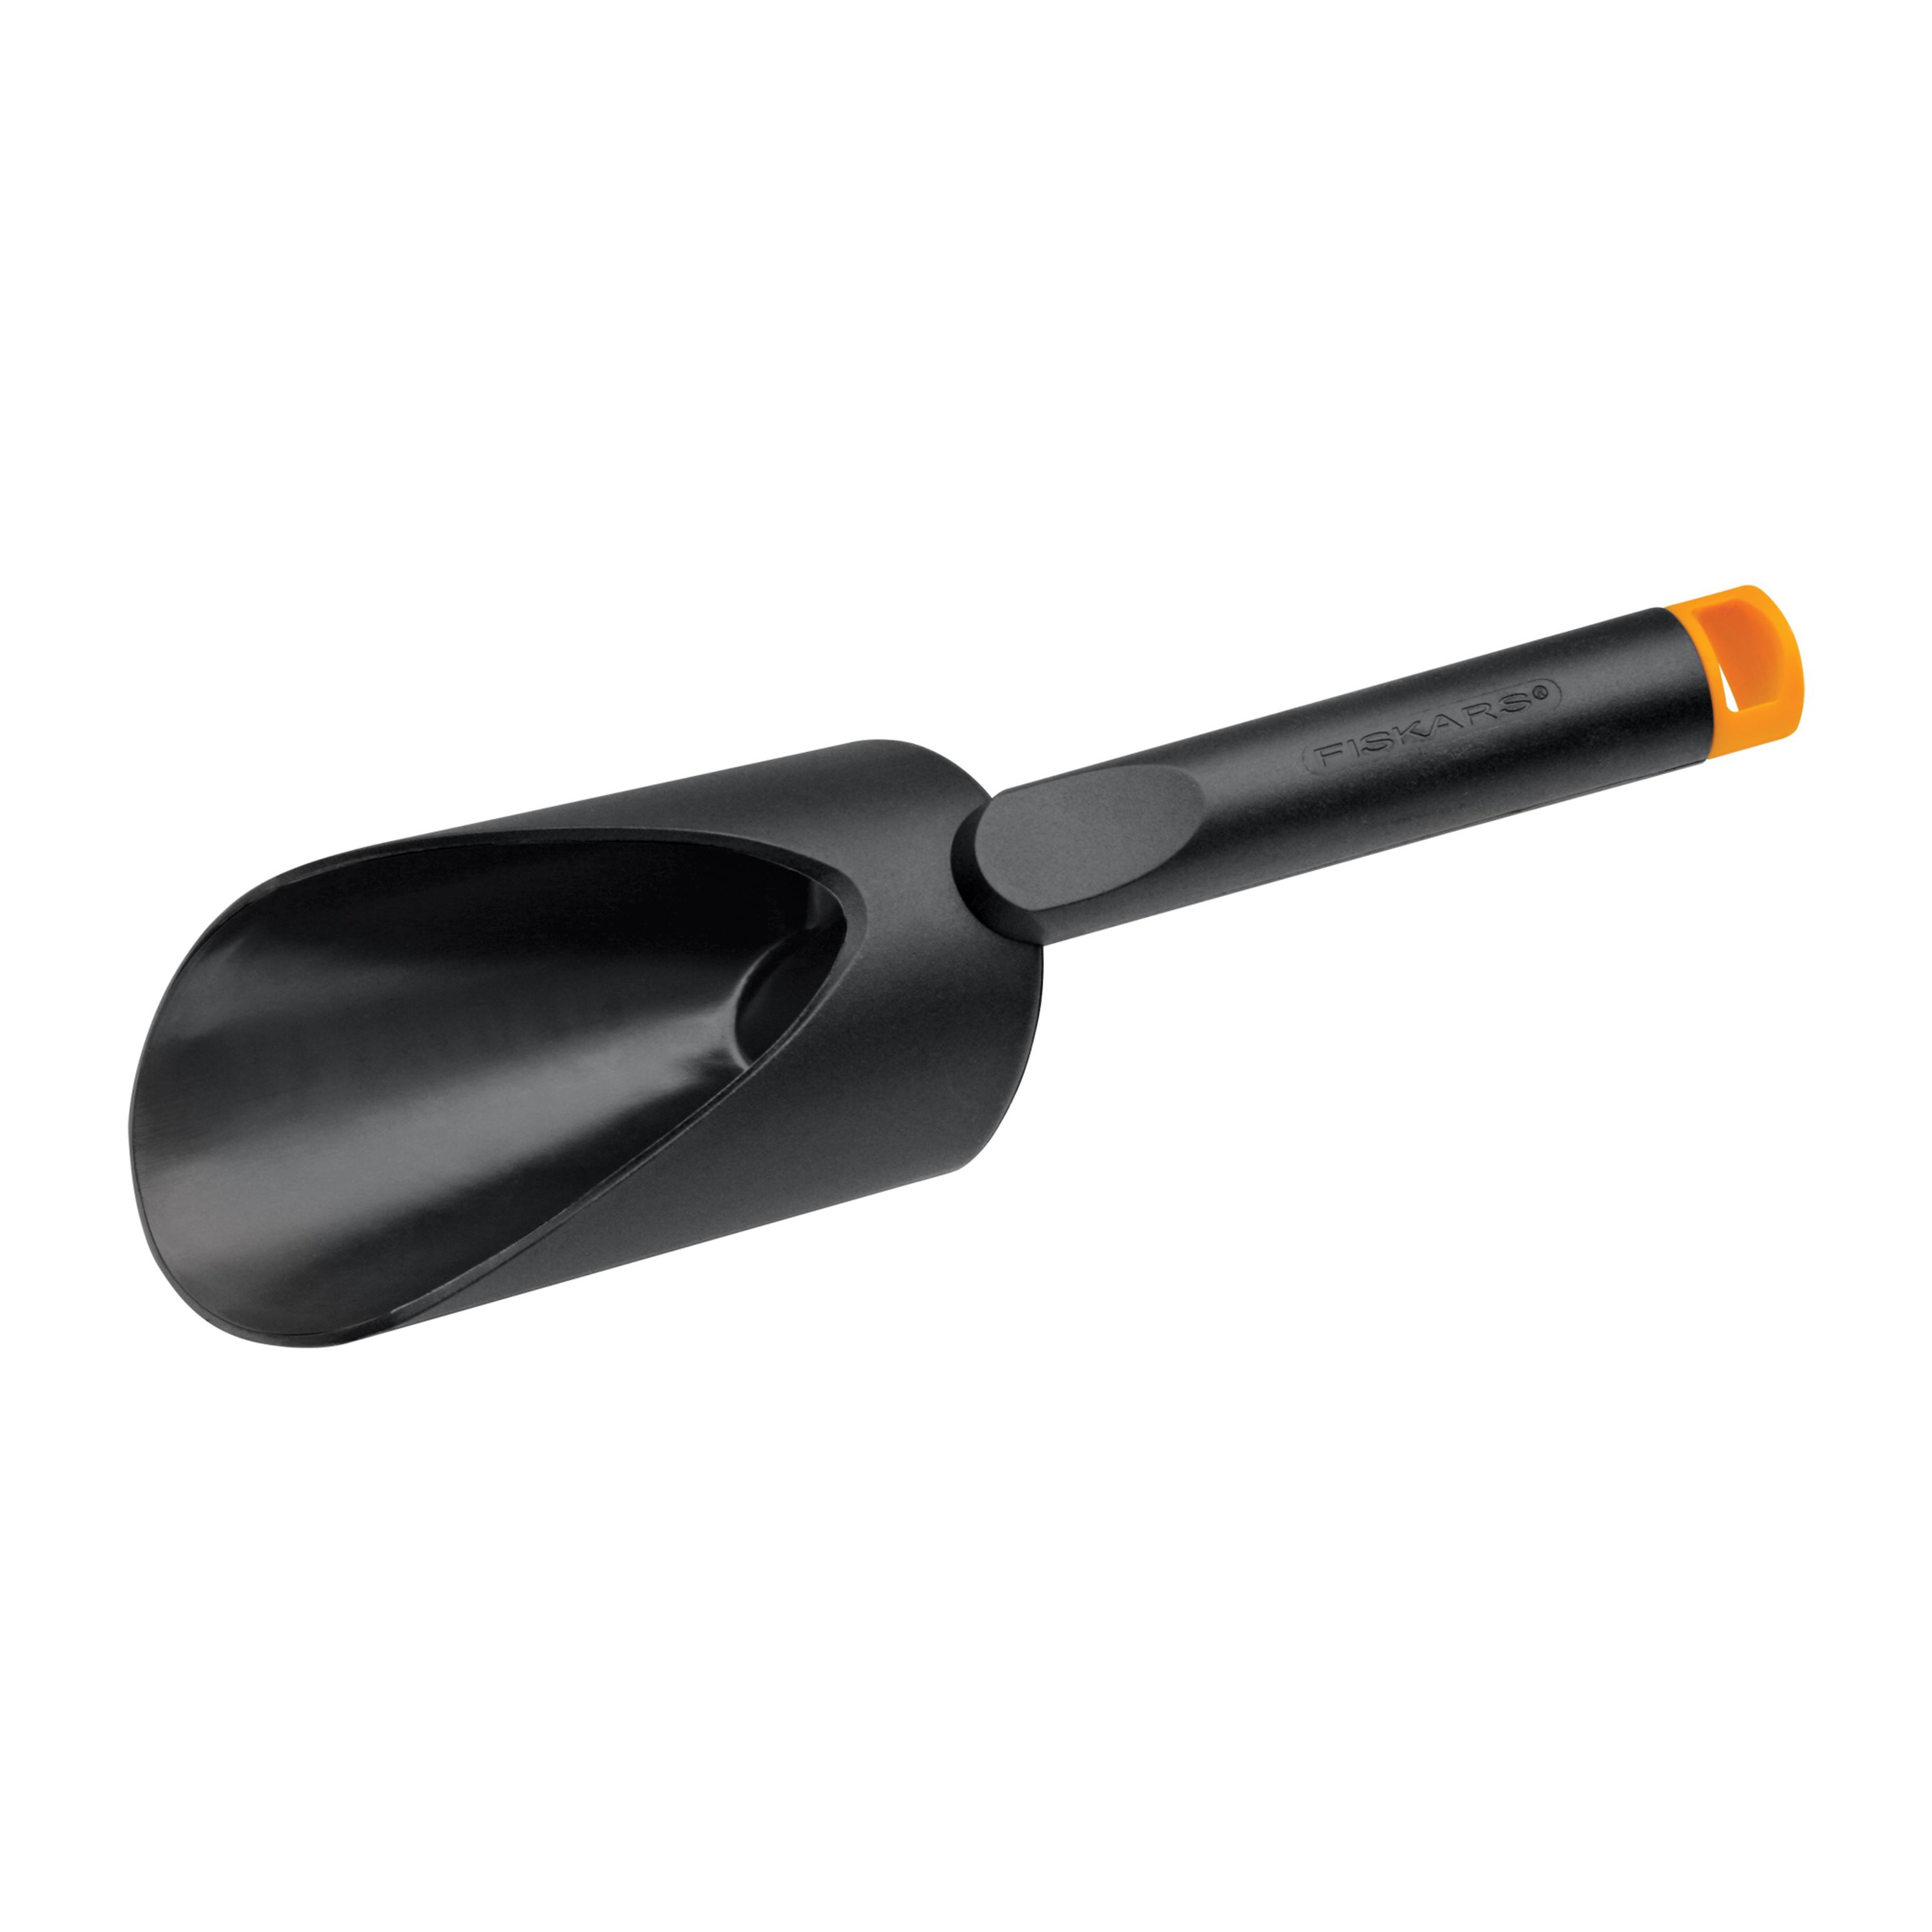 8x Fiskars POTTING SCOOP Resistant To Abrasion,Repeated Impacts&Organic Solvents 